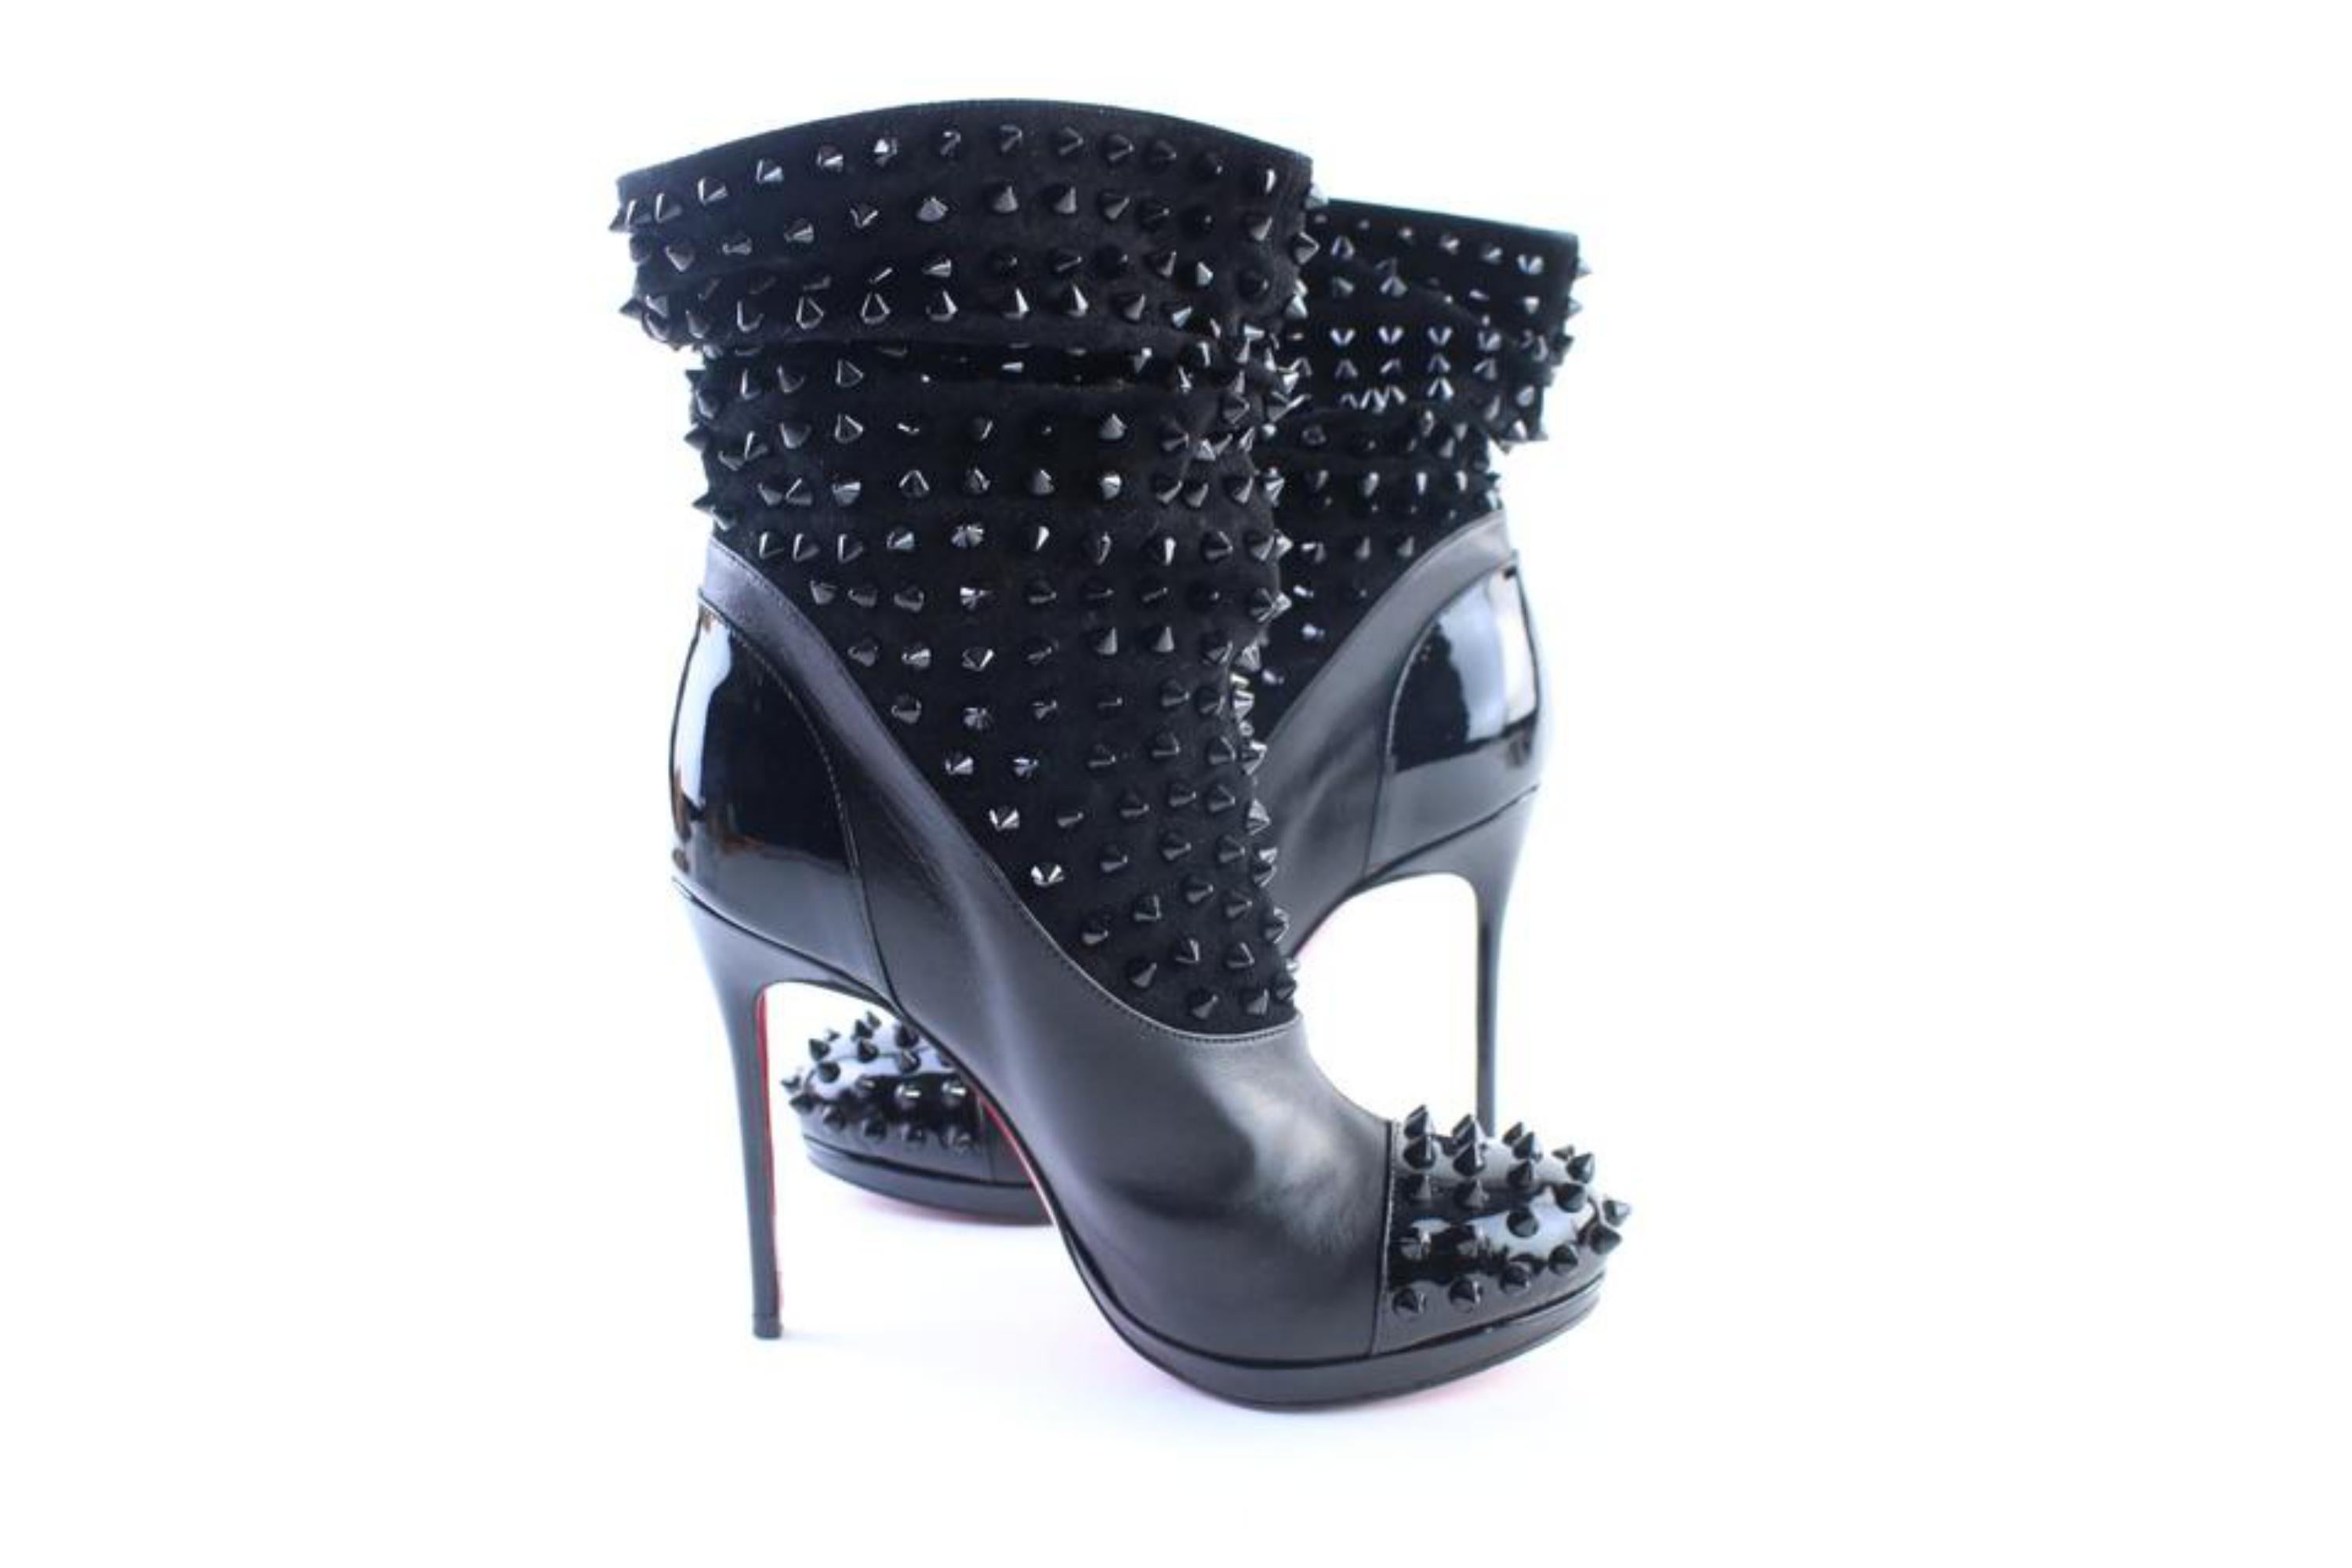 Christian Louboutin Black Spike Wars Ankle 43clr0627 Boots/Booties In Good Condition For Sale In Forest Hills, NY